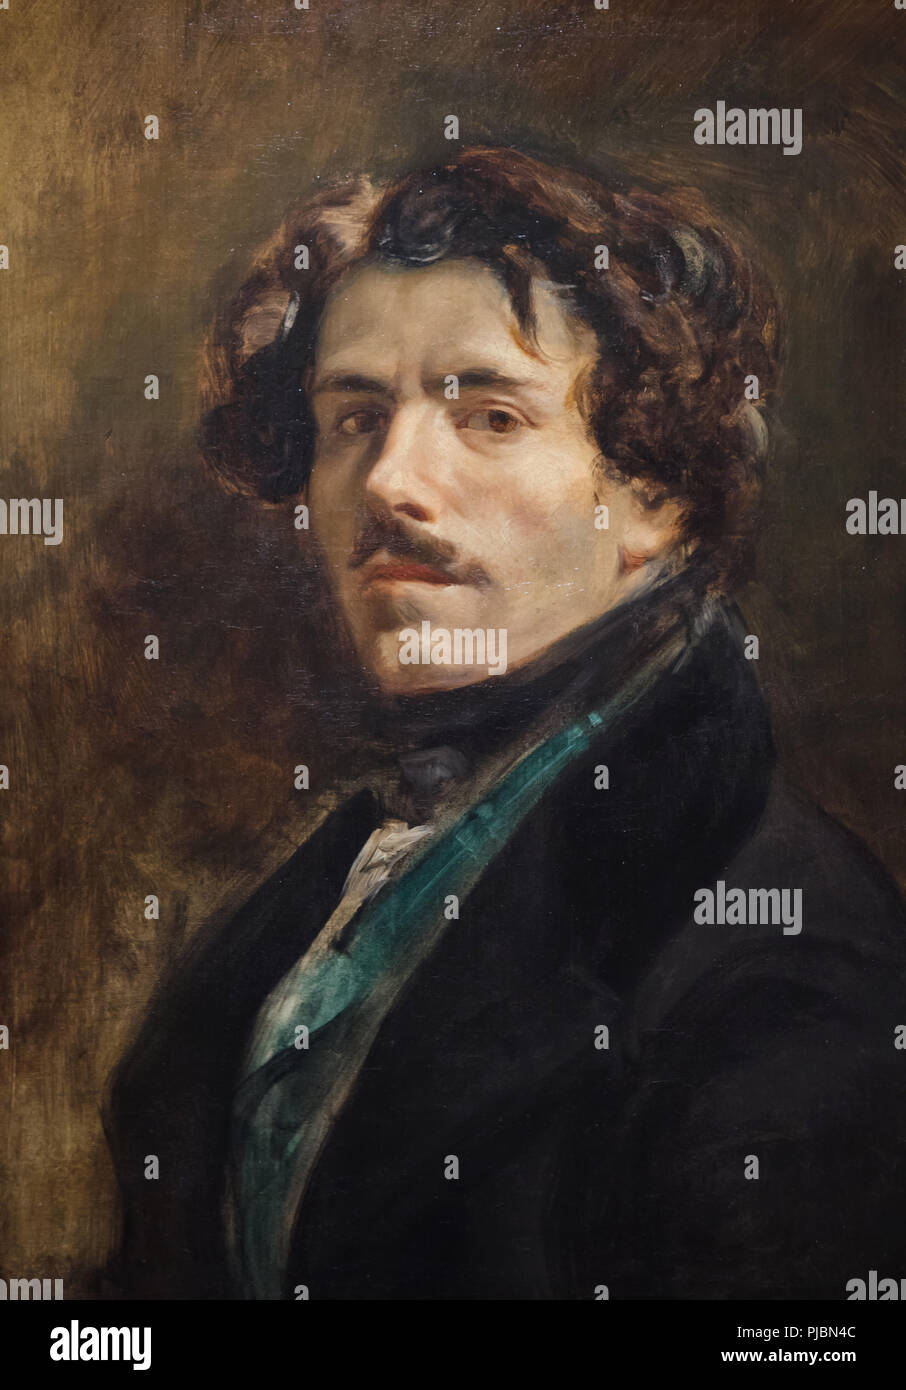 Self-portrait by French Romantic painter Eugène Delacroix, known as 'The Self-portrait in the Green Vest' (ca. 1837) on display at his retrospective exhibition in the Louvre Museum in Paris, France. The exhibition presenting the masterpieces of the leader of French Romanticism runs till 23 July 2018. Stock Photo